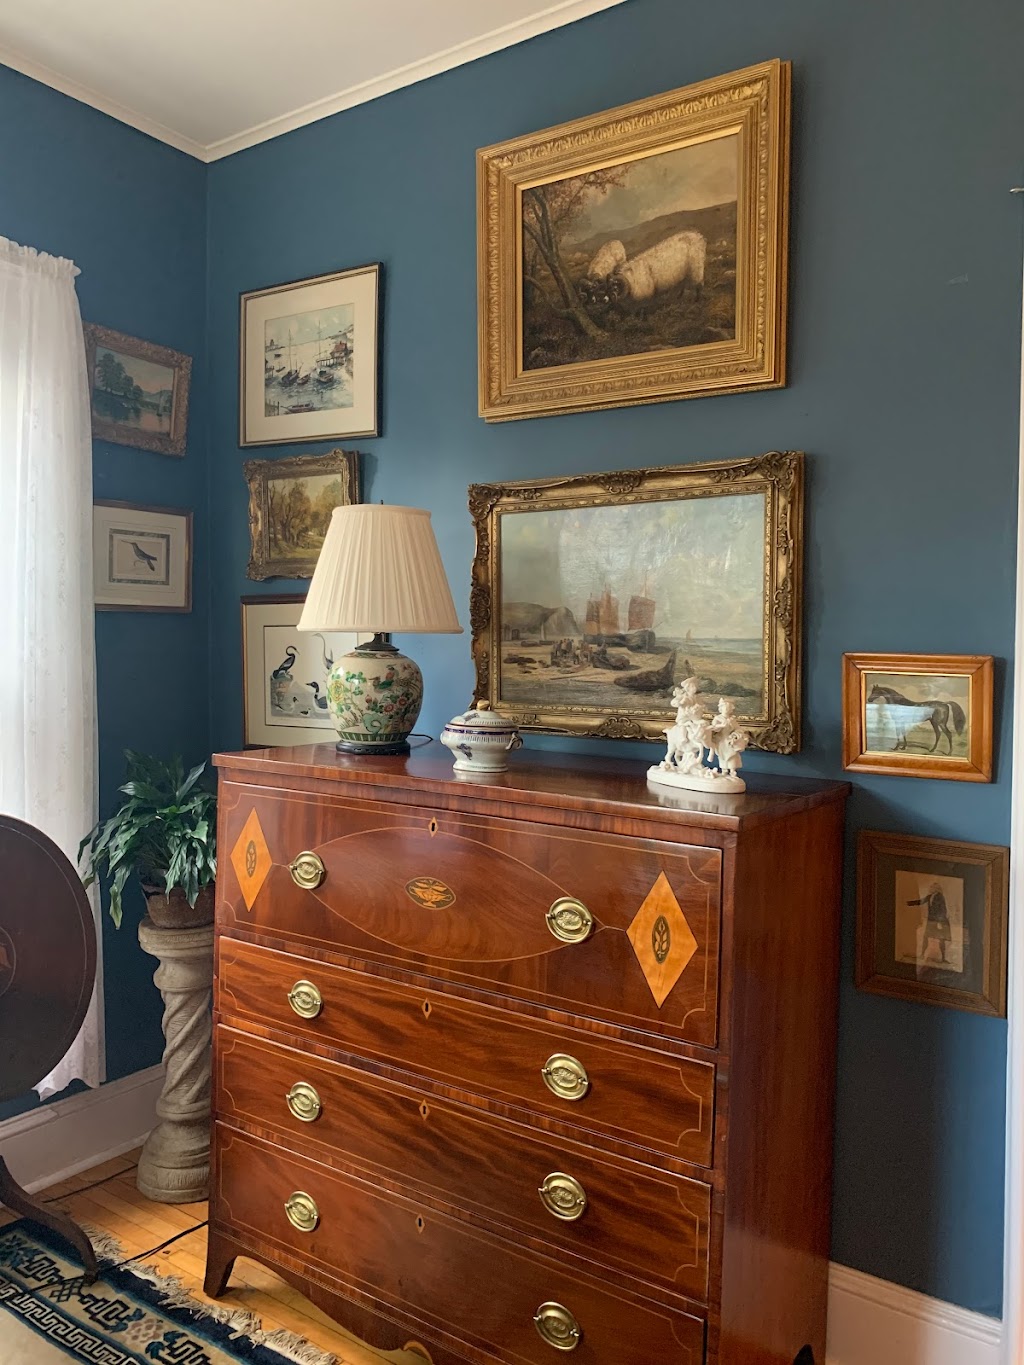 Madeline West Antiques | 373 Main St S, Woodbury, CT 06798 | Phone: (203) 263-4604